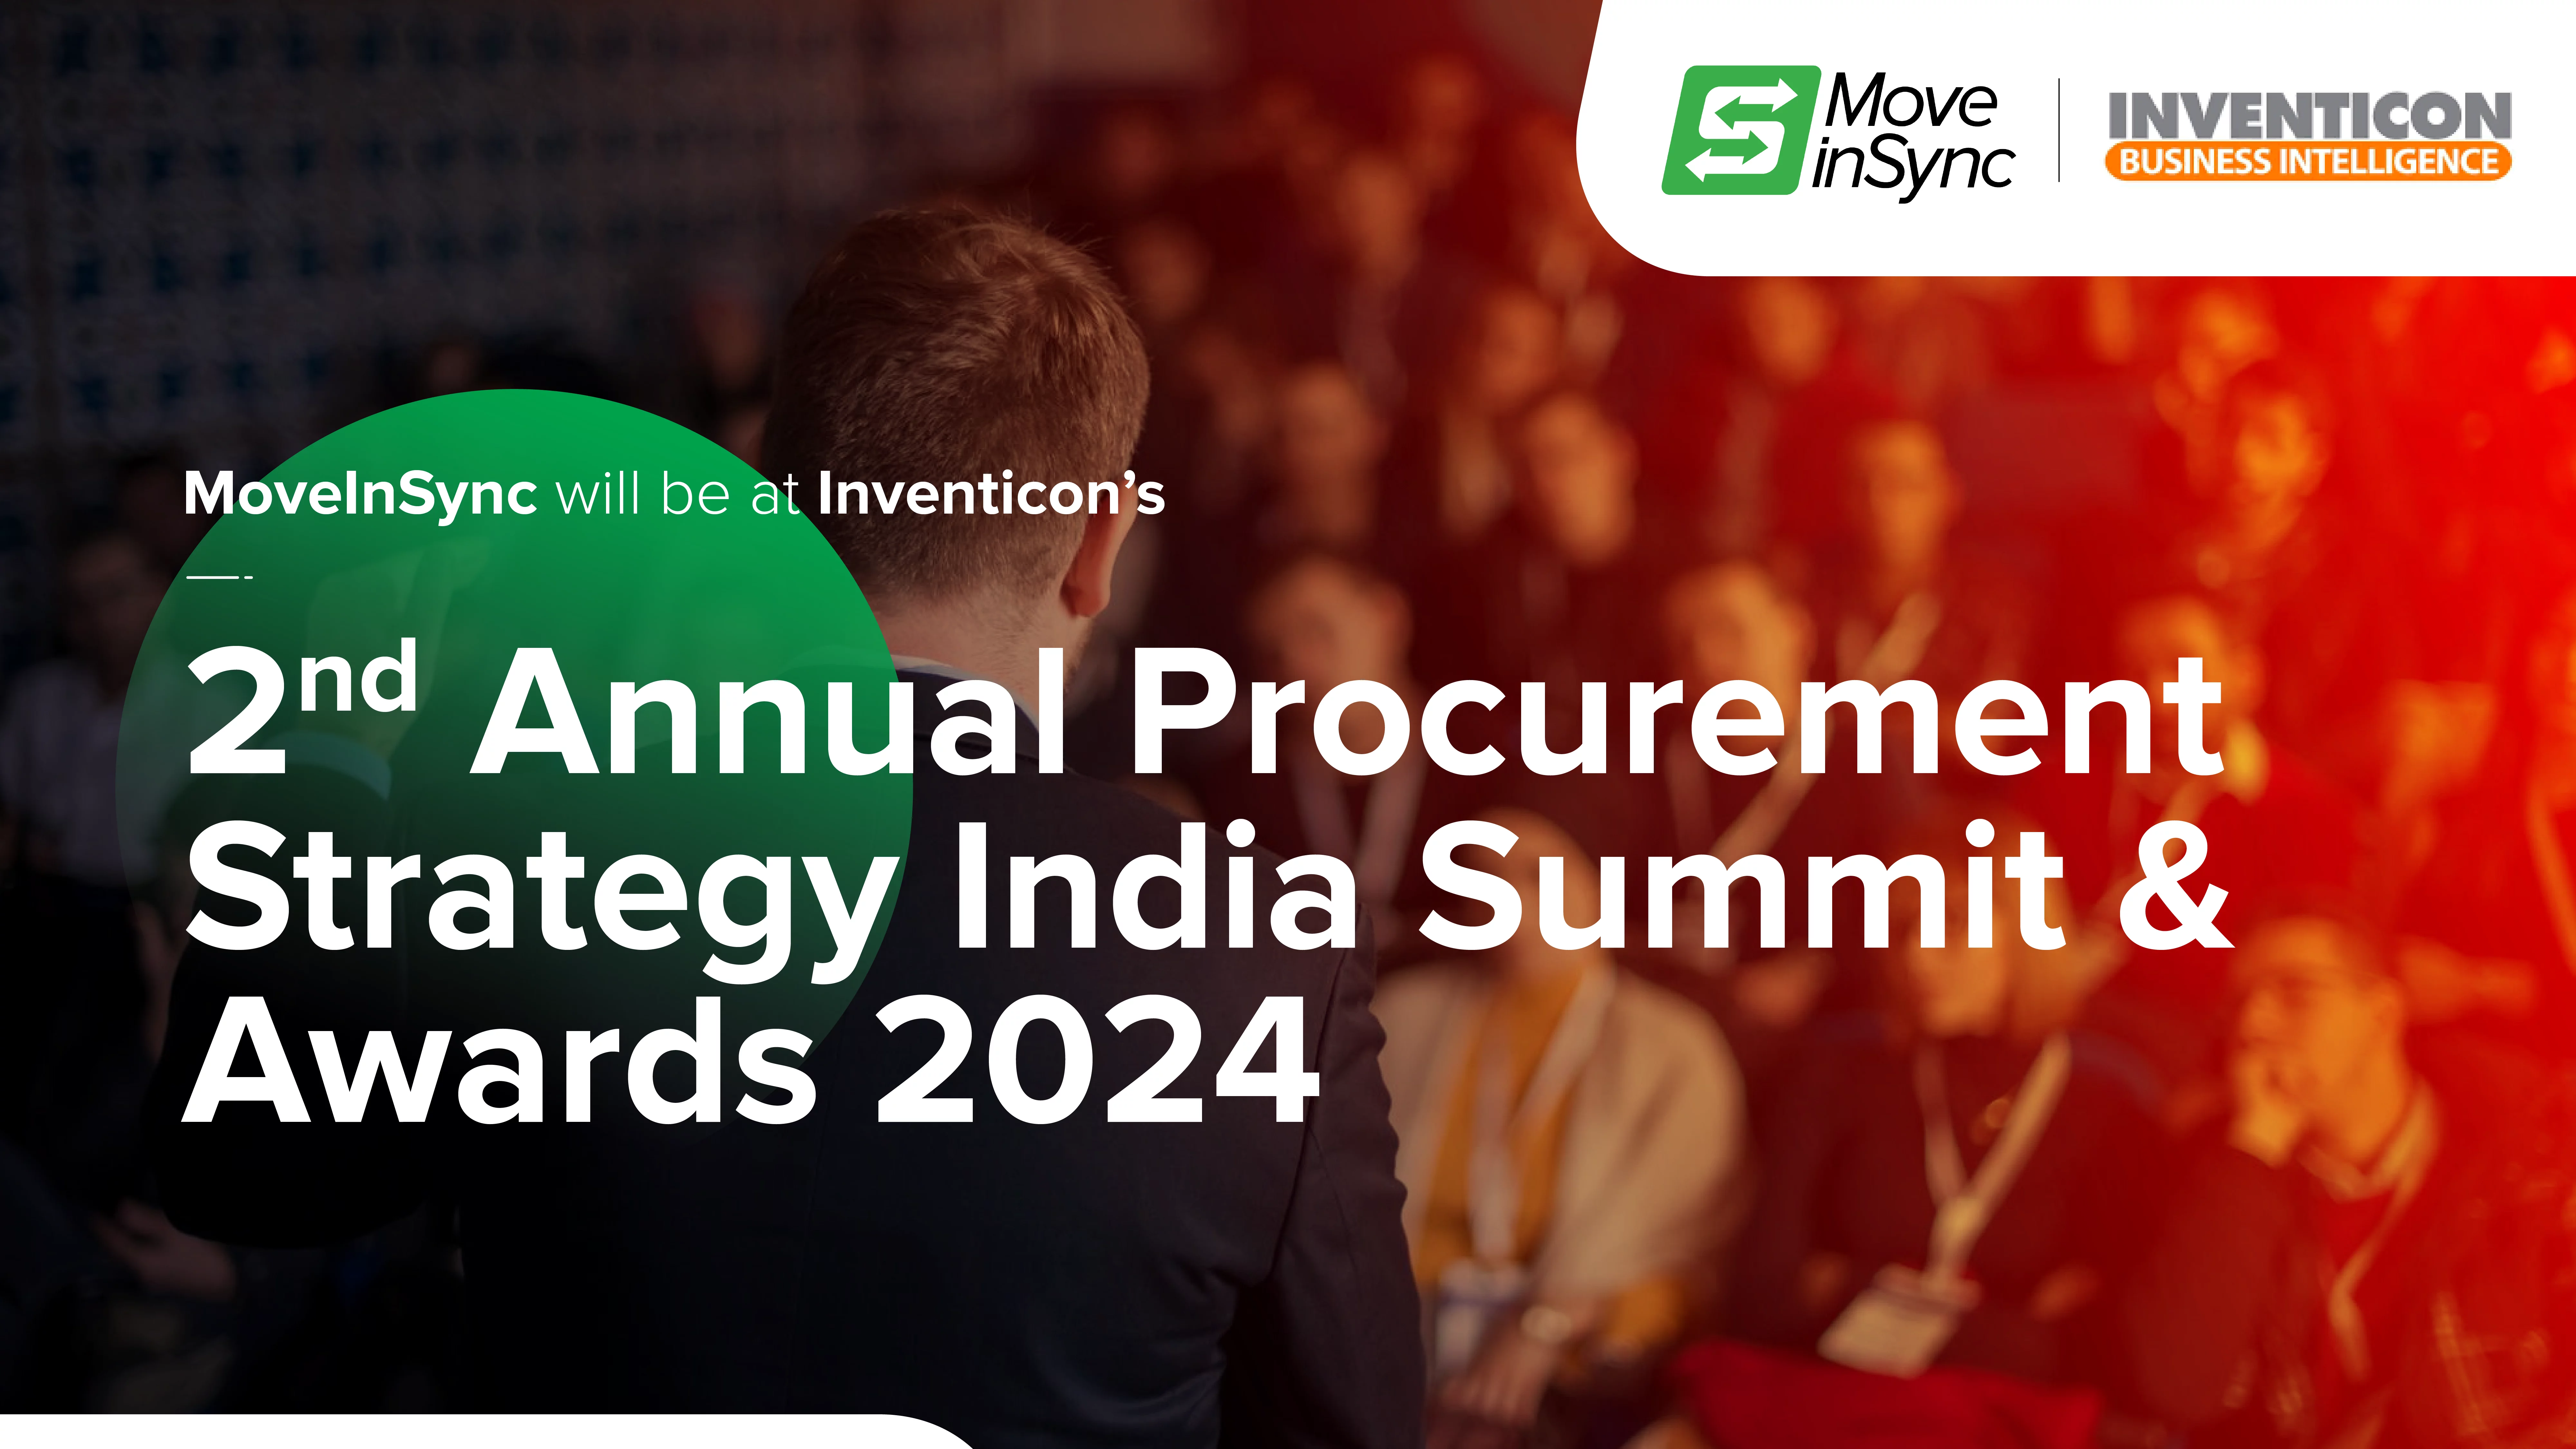 2nd Annual Procurement Strategy India Summit & Awards 2024